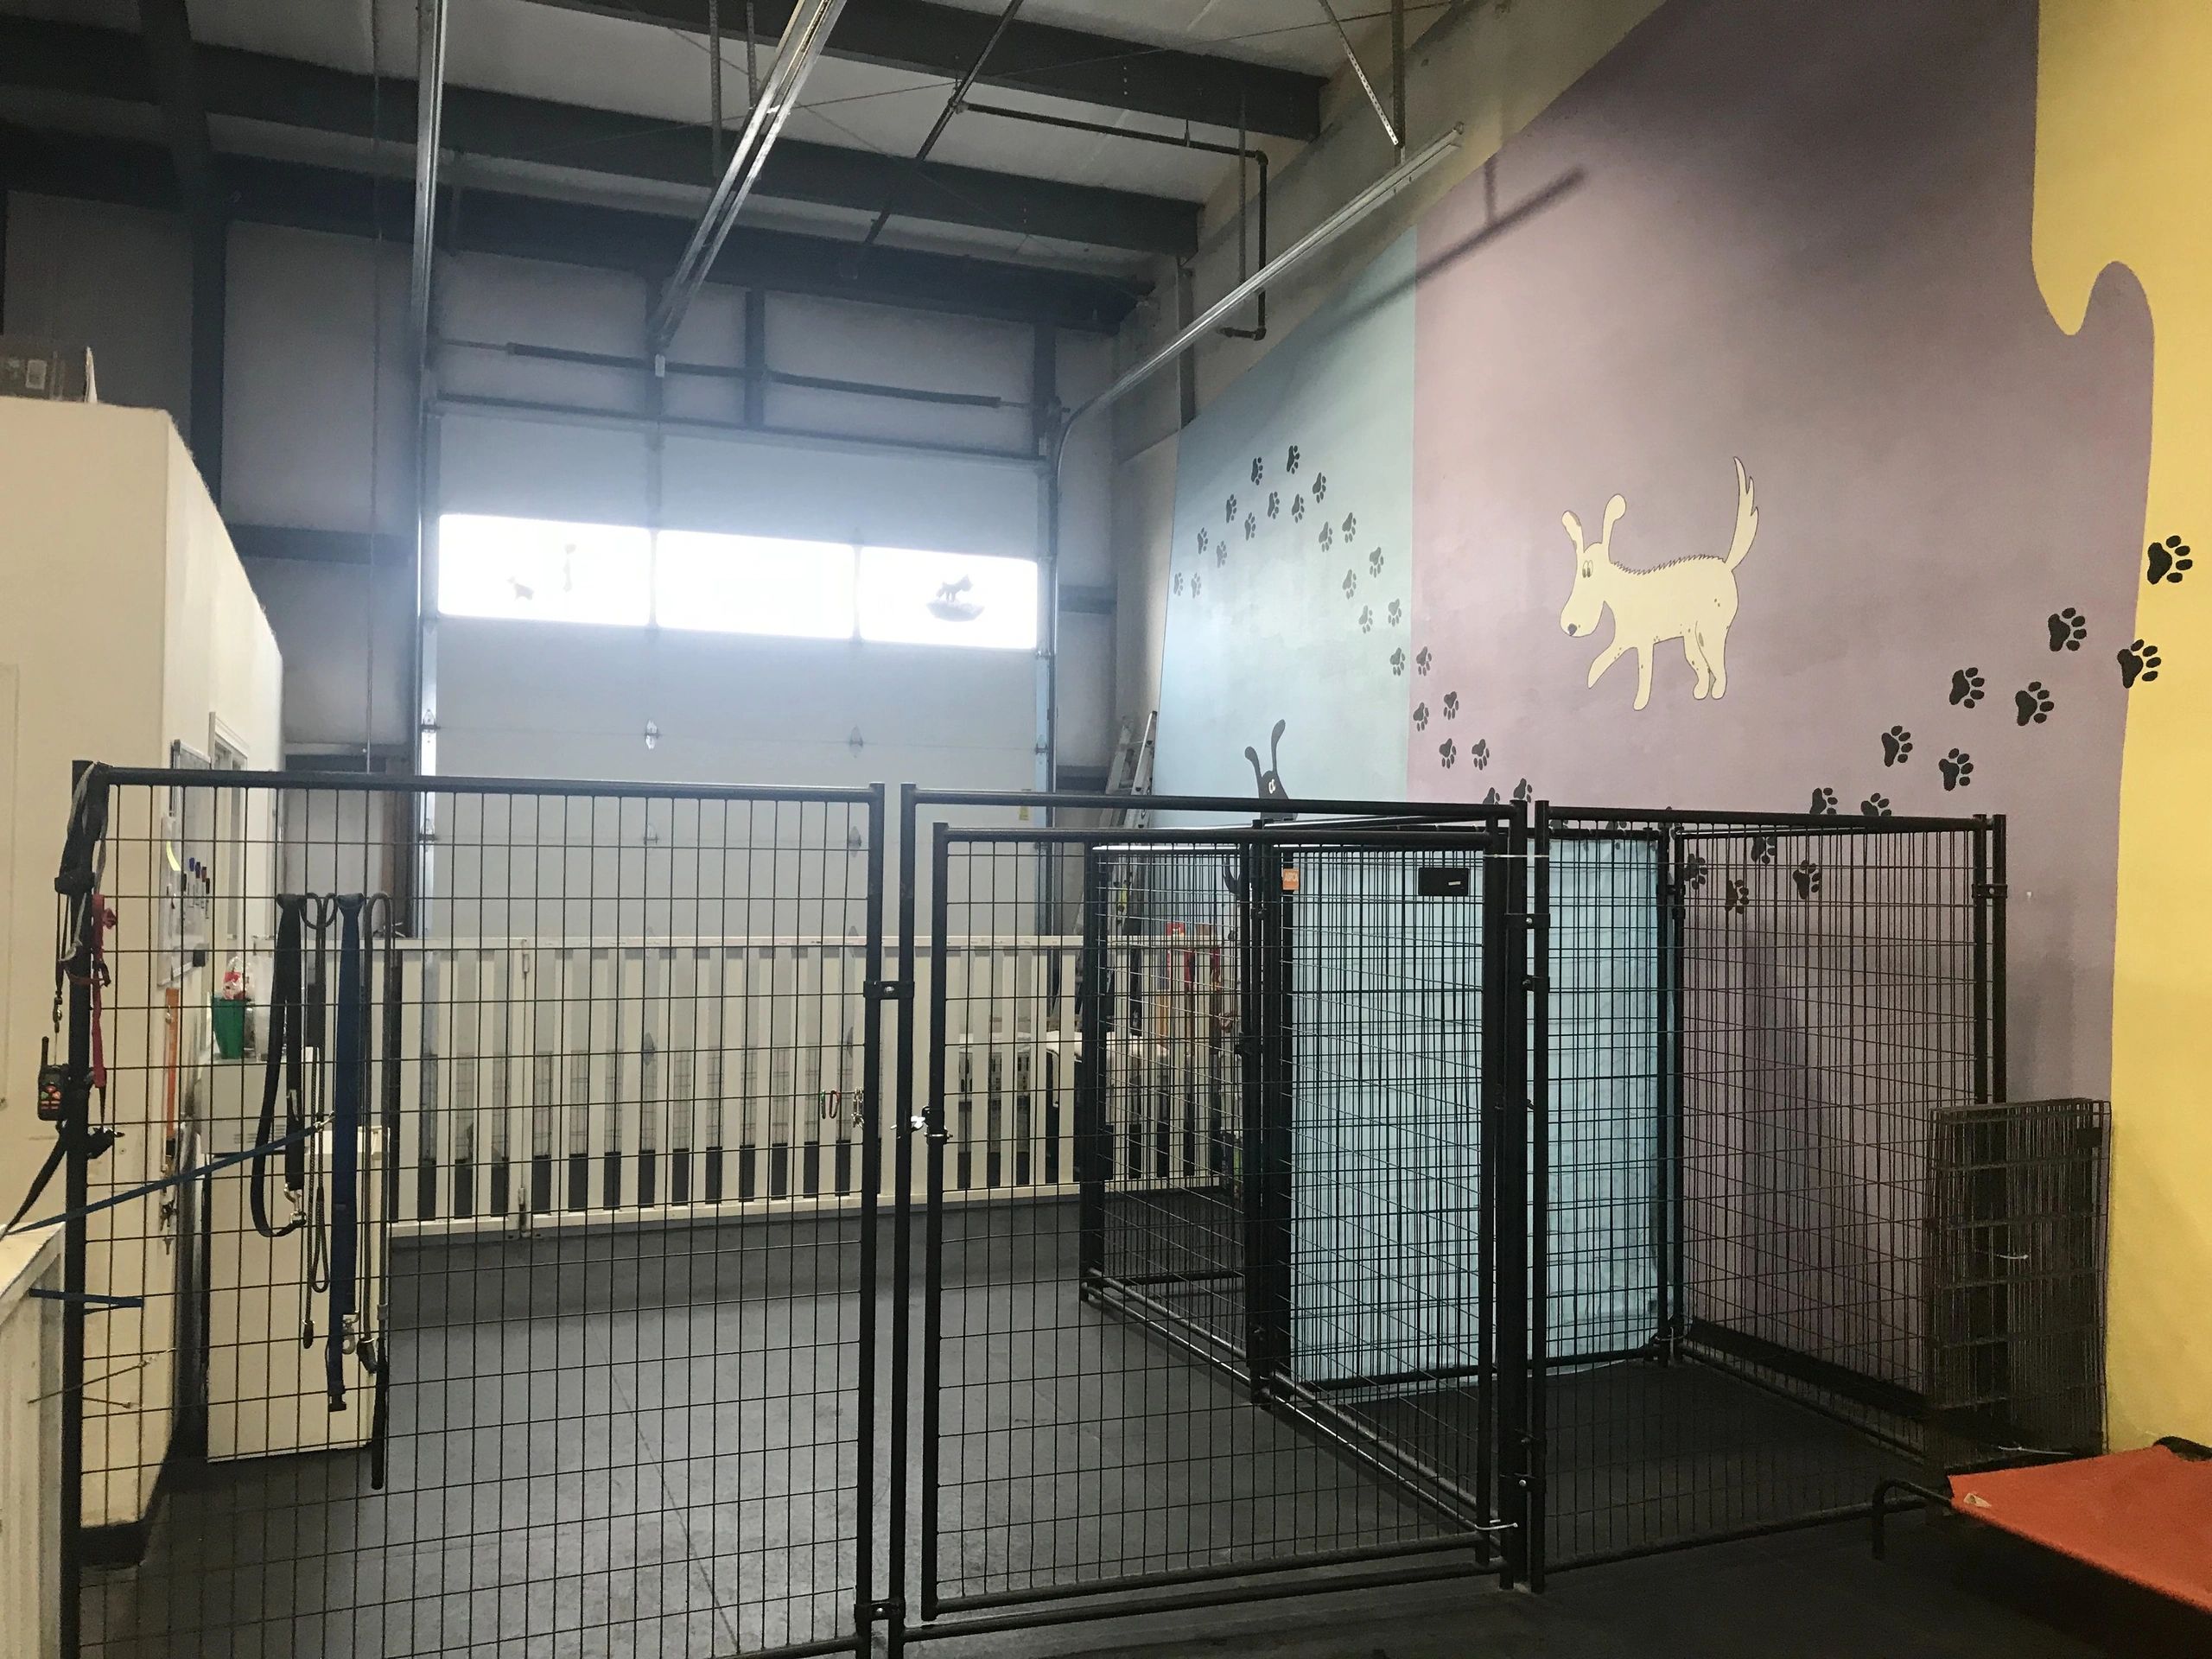 Staging area for dog and puppies acclimating to new dog day care experience
